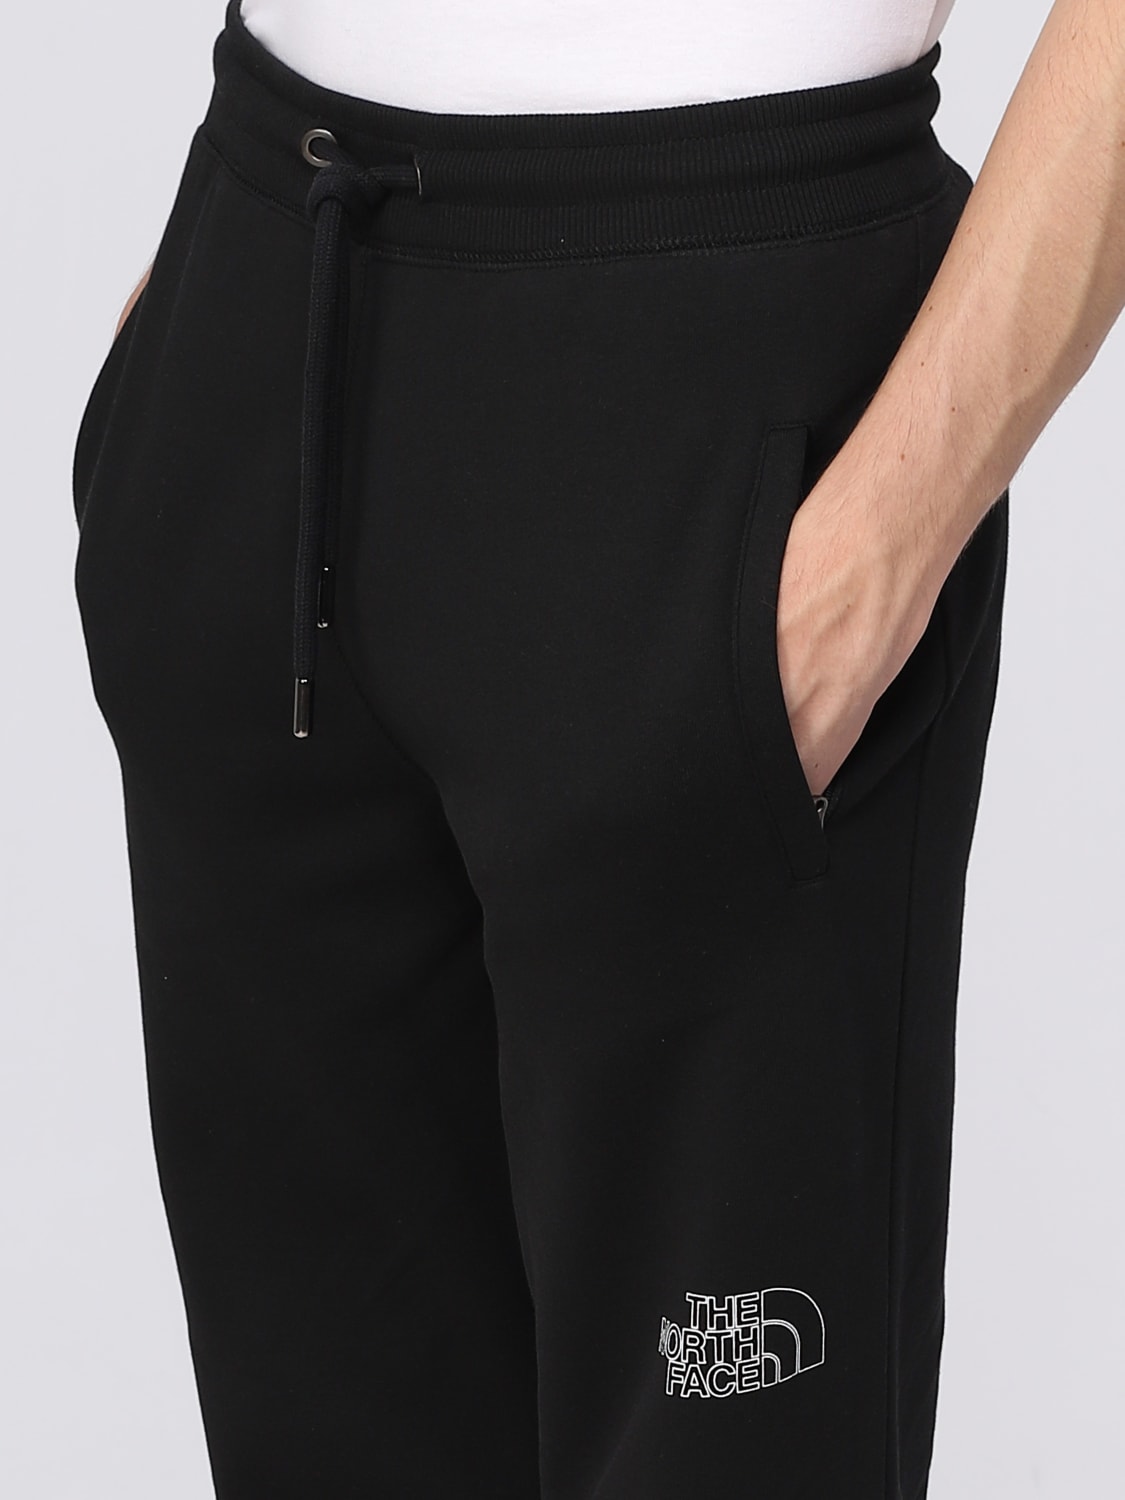 THE NORTH FACE: pants for man - Black | The North Face pants NF0A7X1H ...